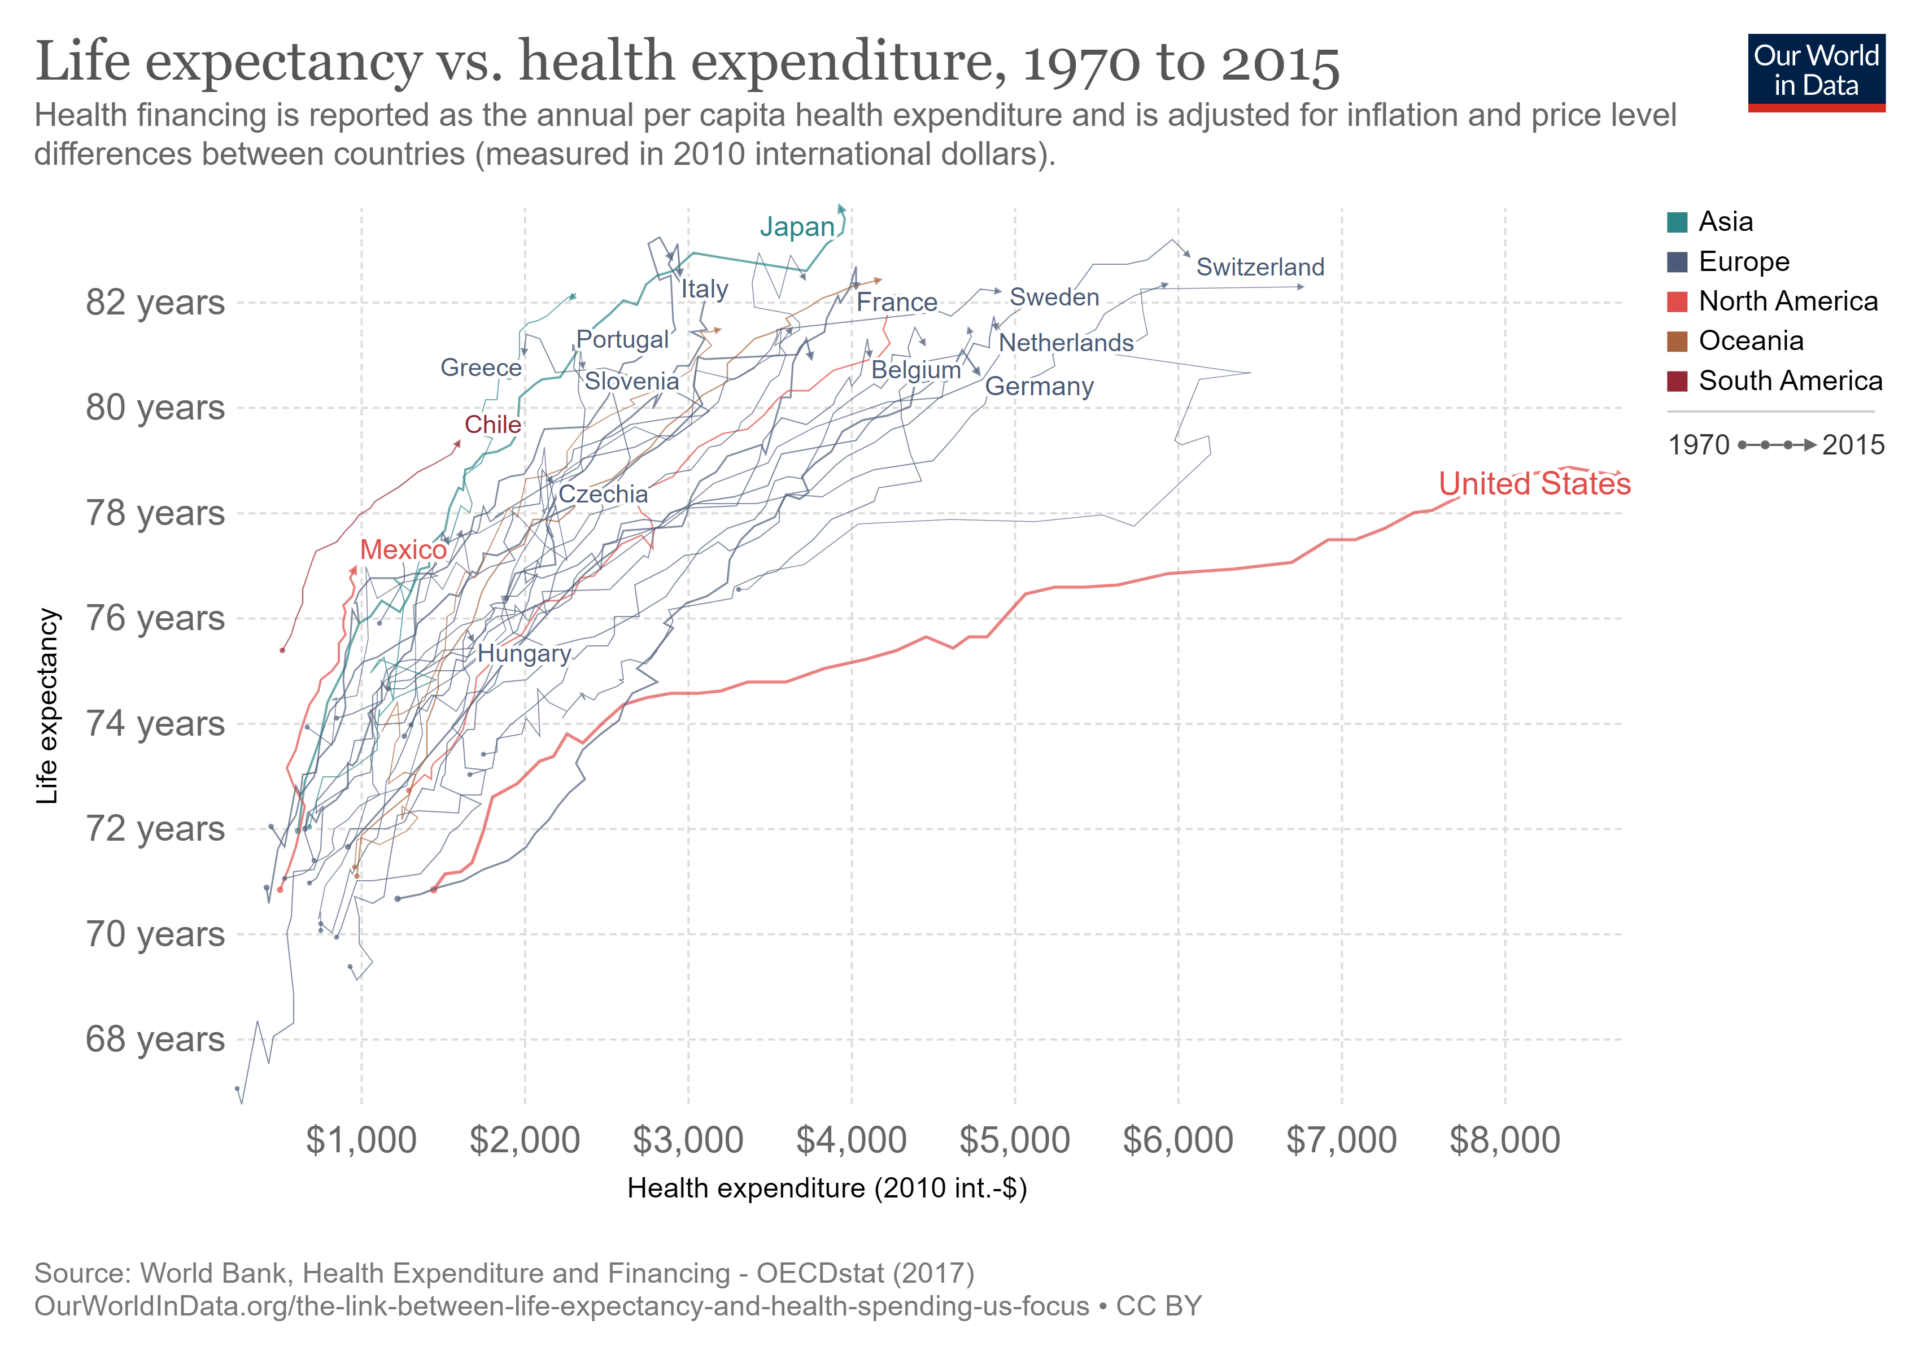 on1-life-expectancy-vs-health-expenditure